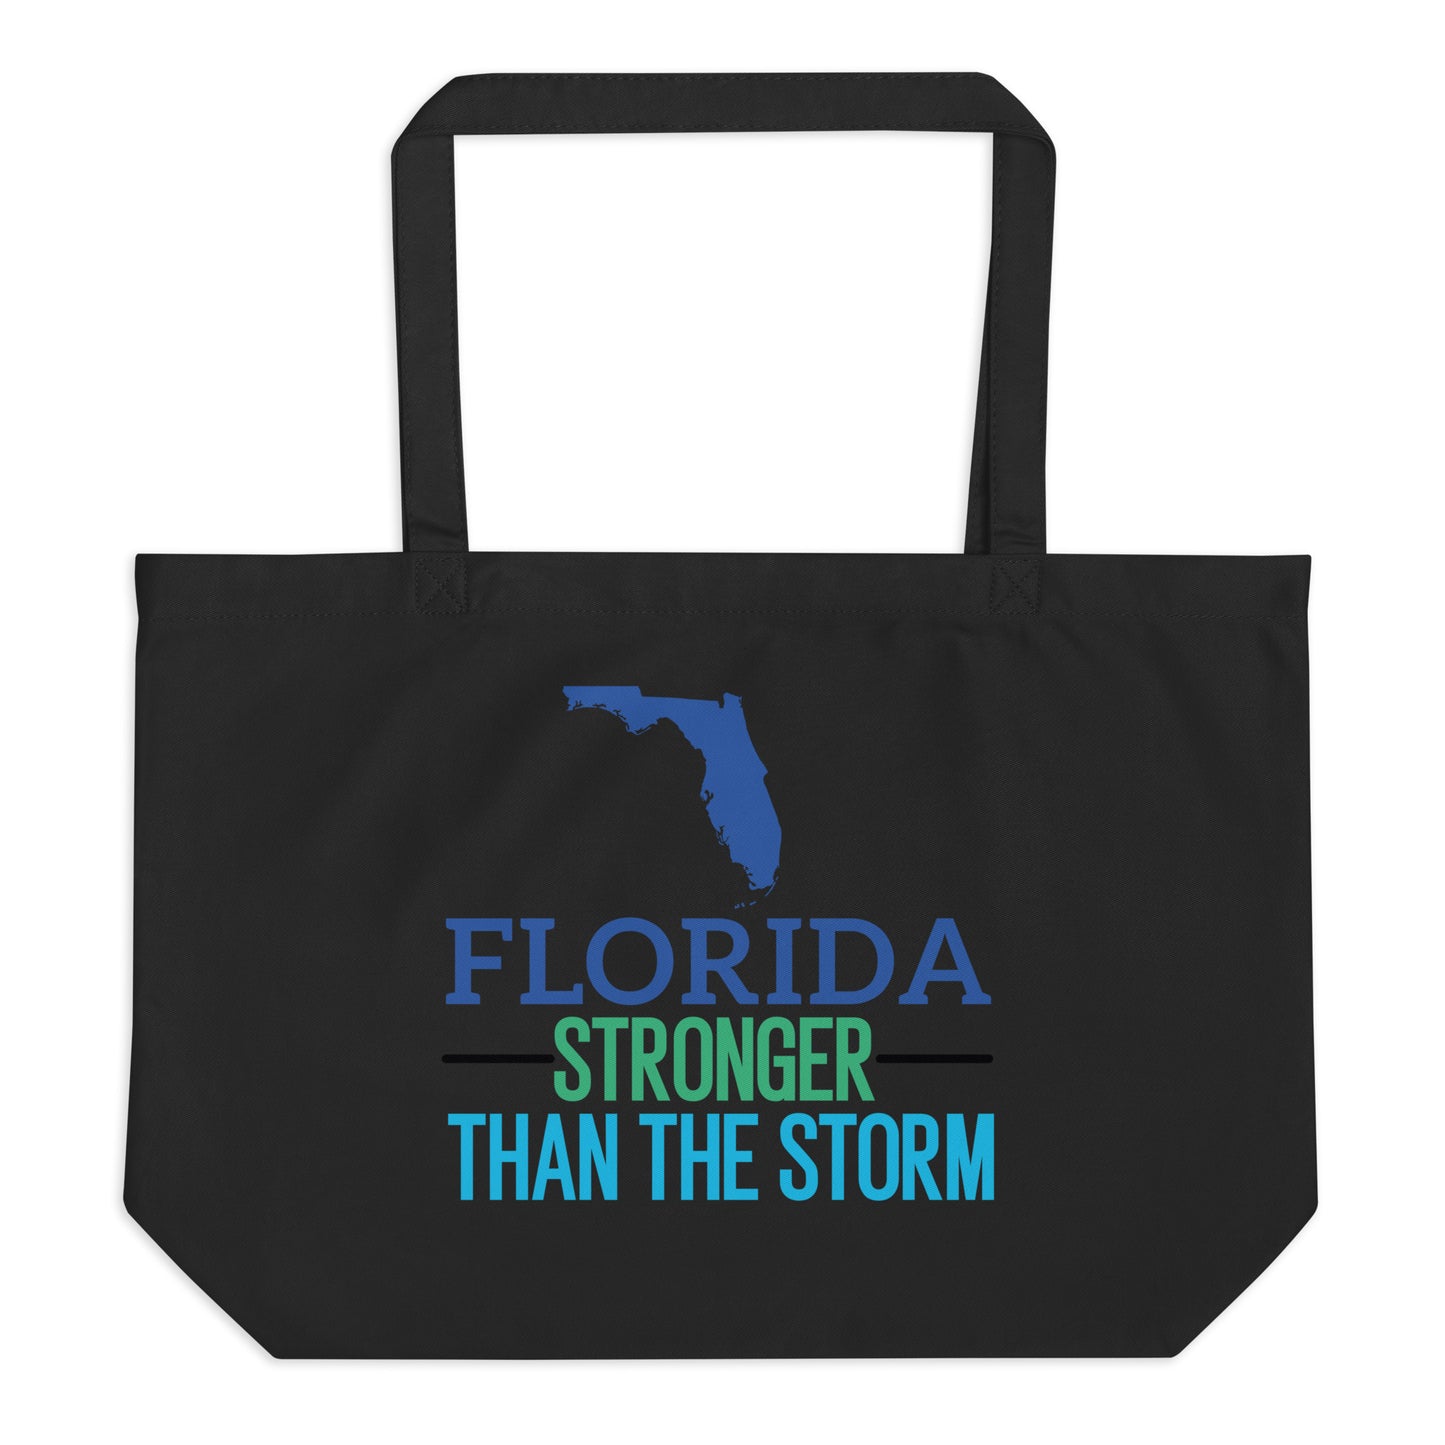 Florida Stronger Than The Storm Tote Bag